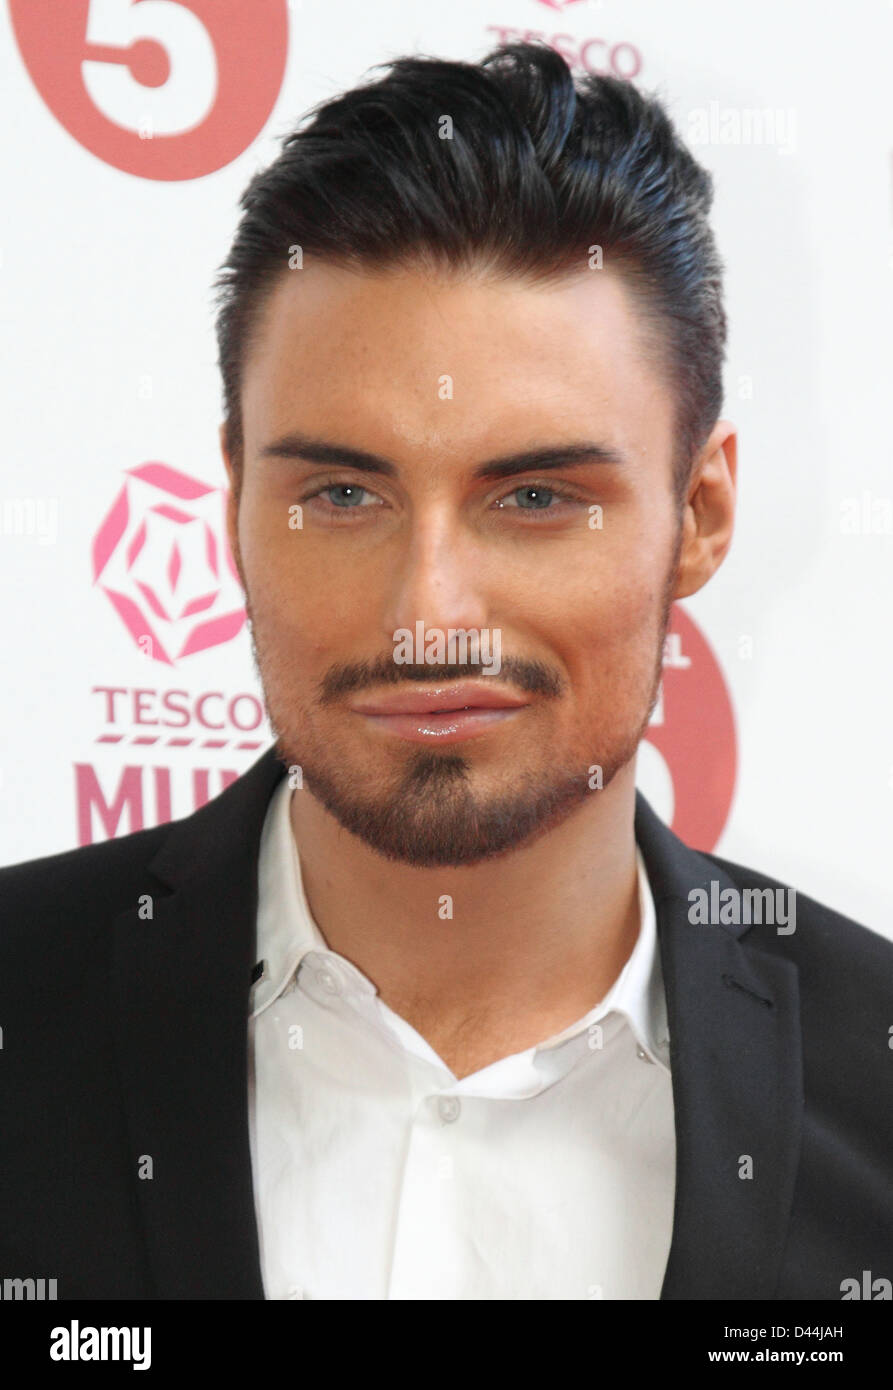 Rylan Clark High Resolution Stock Photography and Images - Alamy